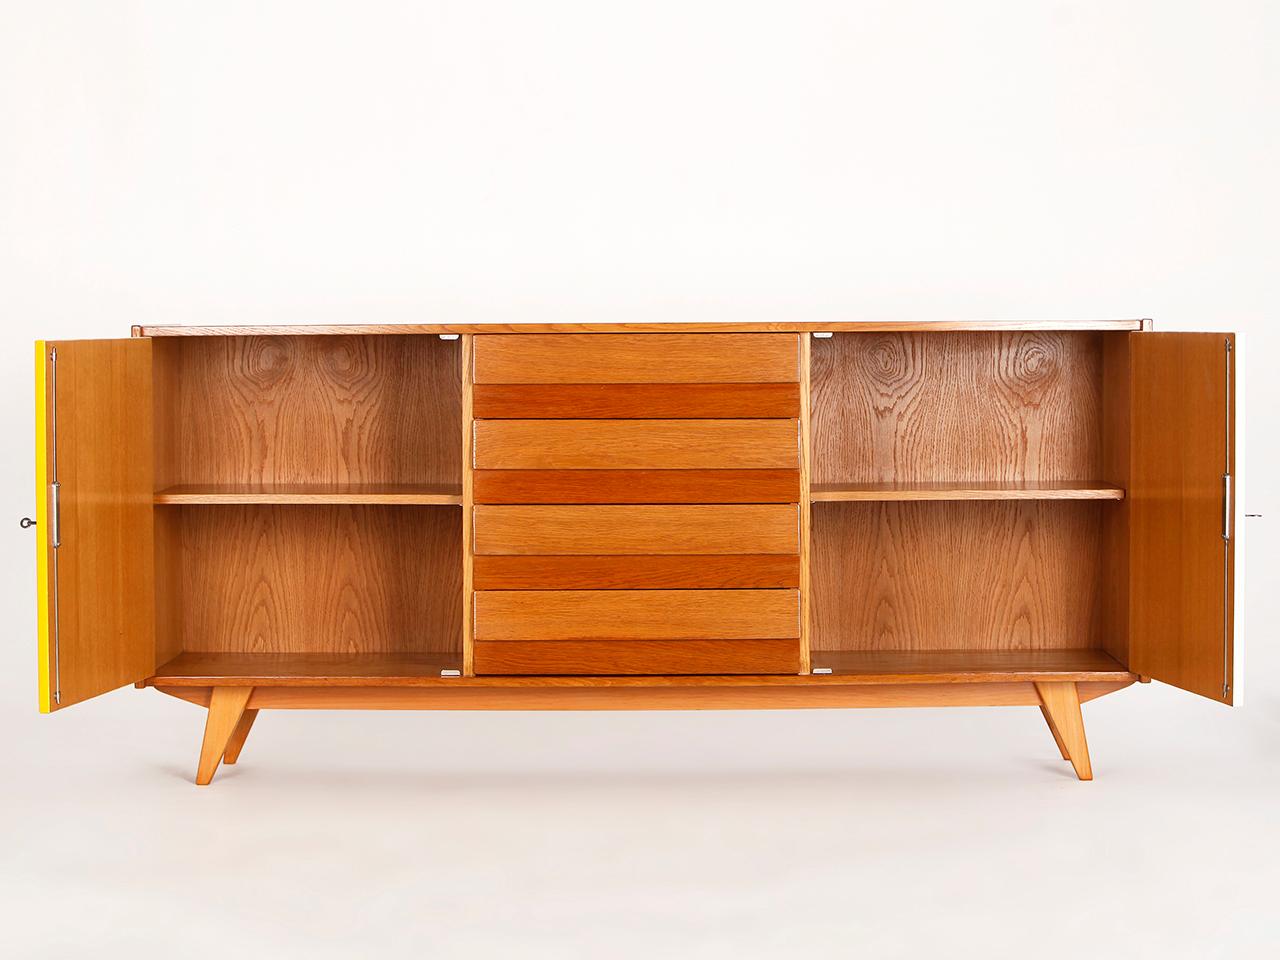 This model U-460 sideboard was designed by Jiri Jiroutek for Interier Praha in former Czechoslovakia. Produced in the 1960s. Completely restored. Excellent condition.